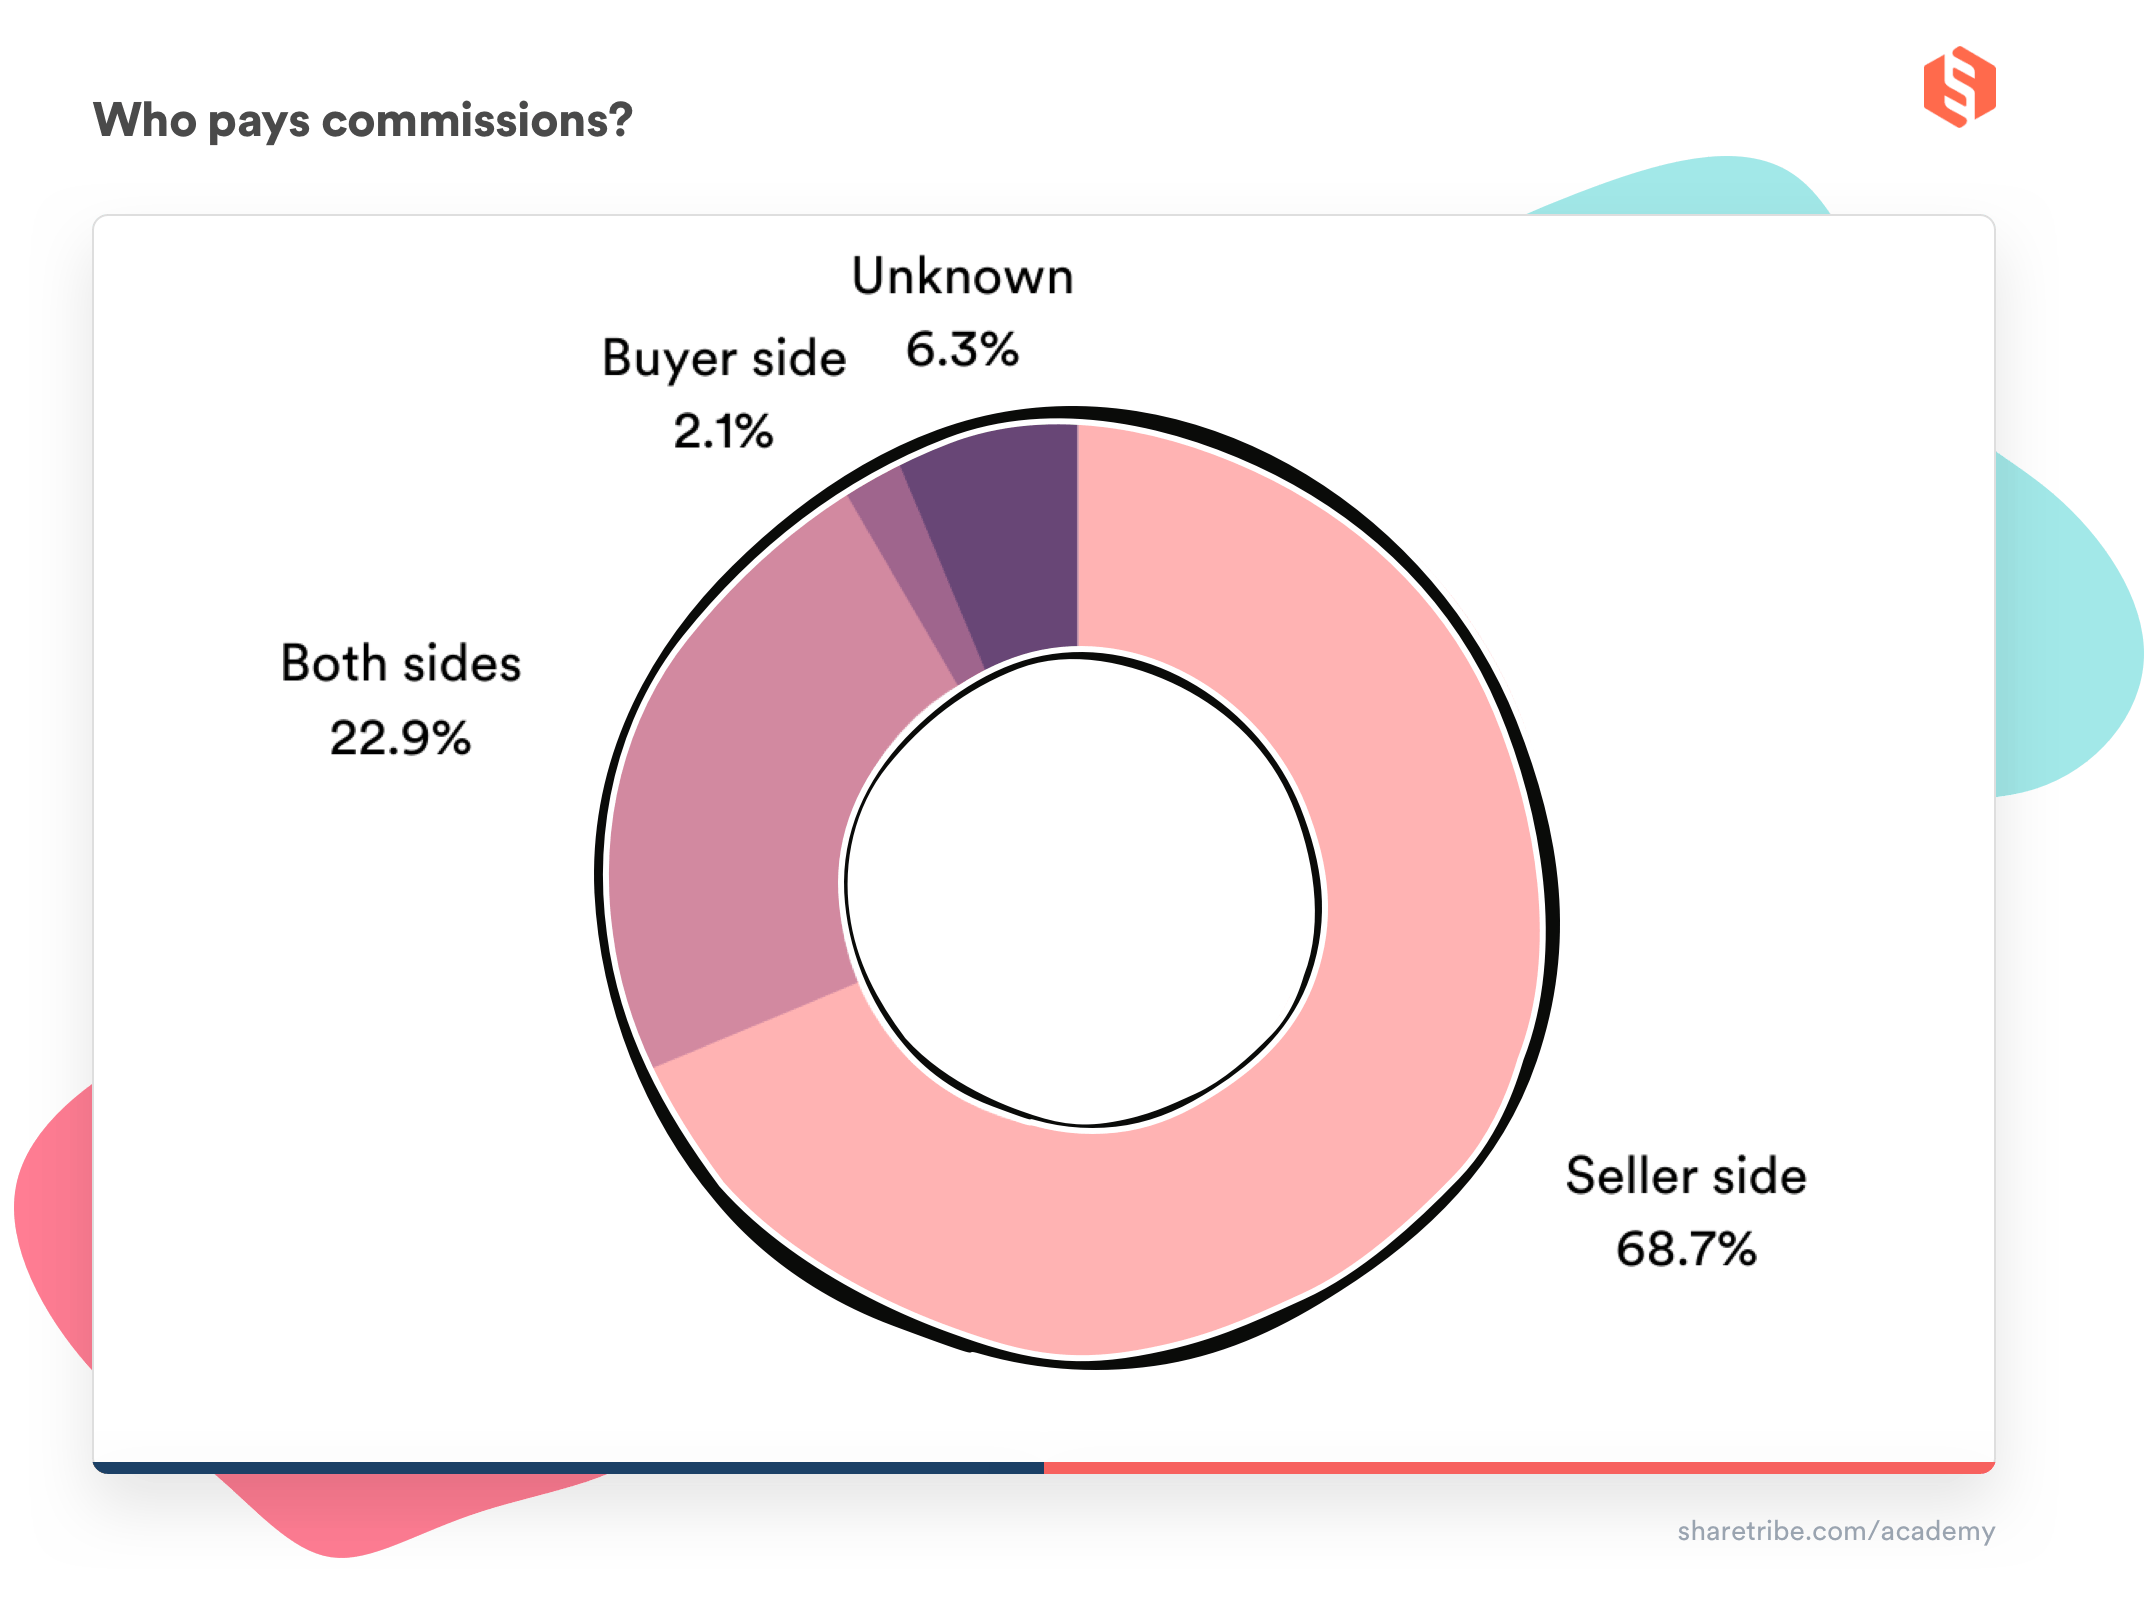 A donut chart on who pays commissions